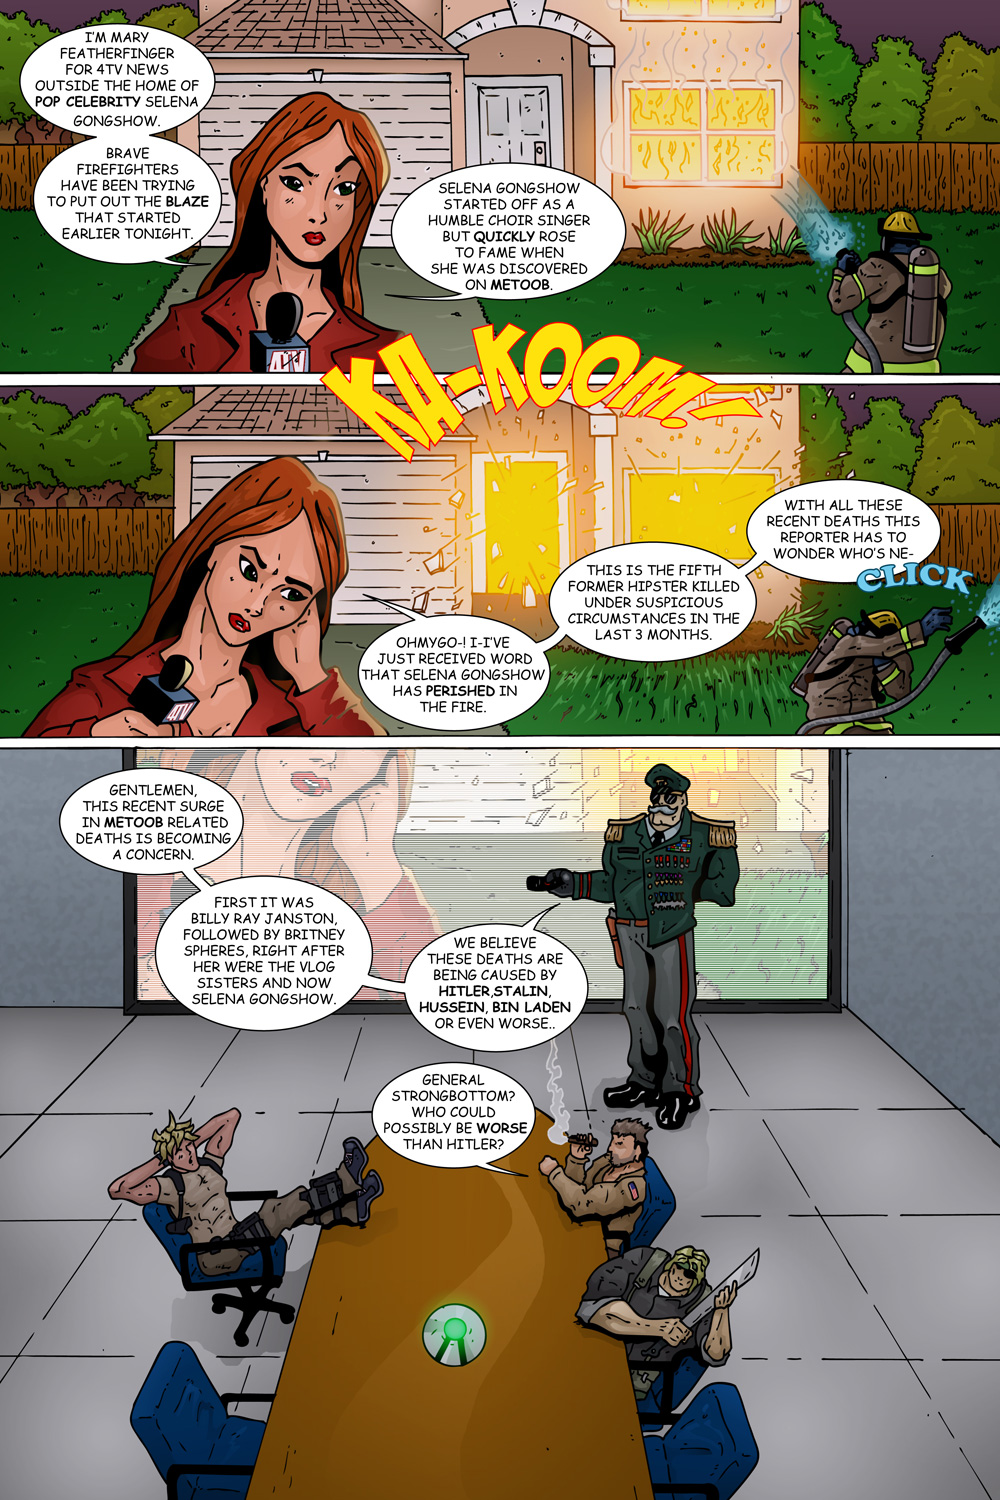 MISSION 004: PAGE 01 “METOOB RELATED DEATHS”